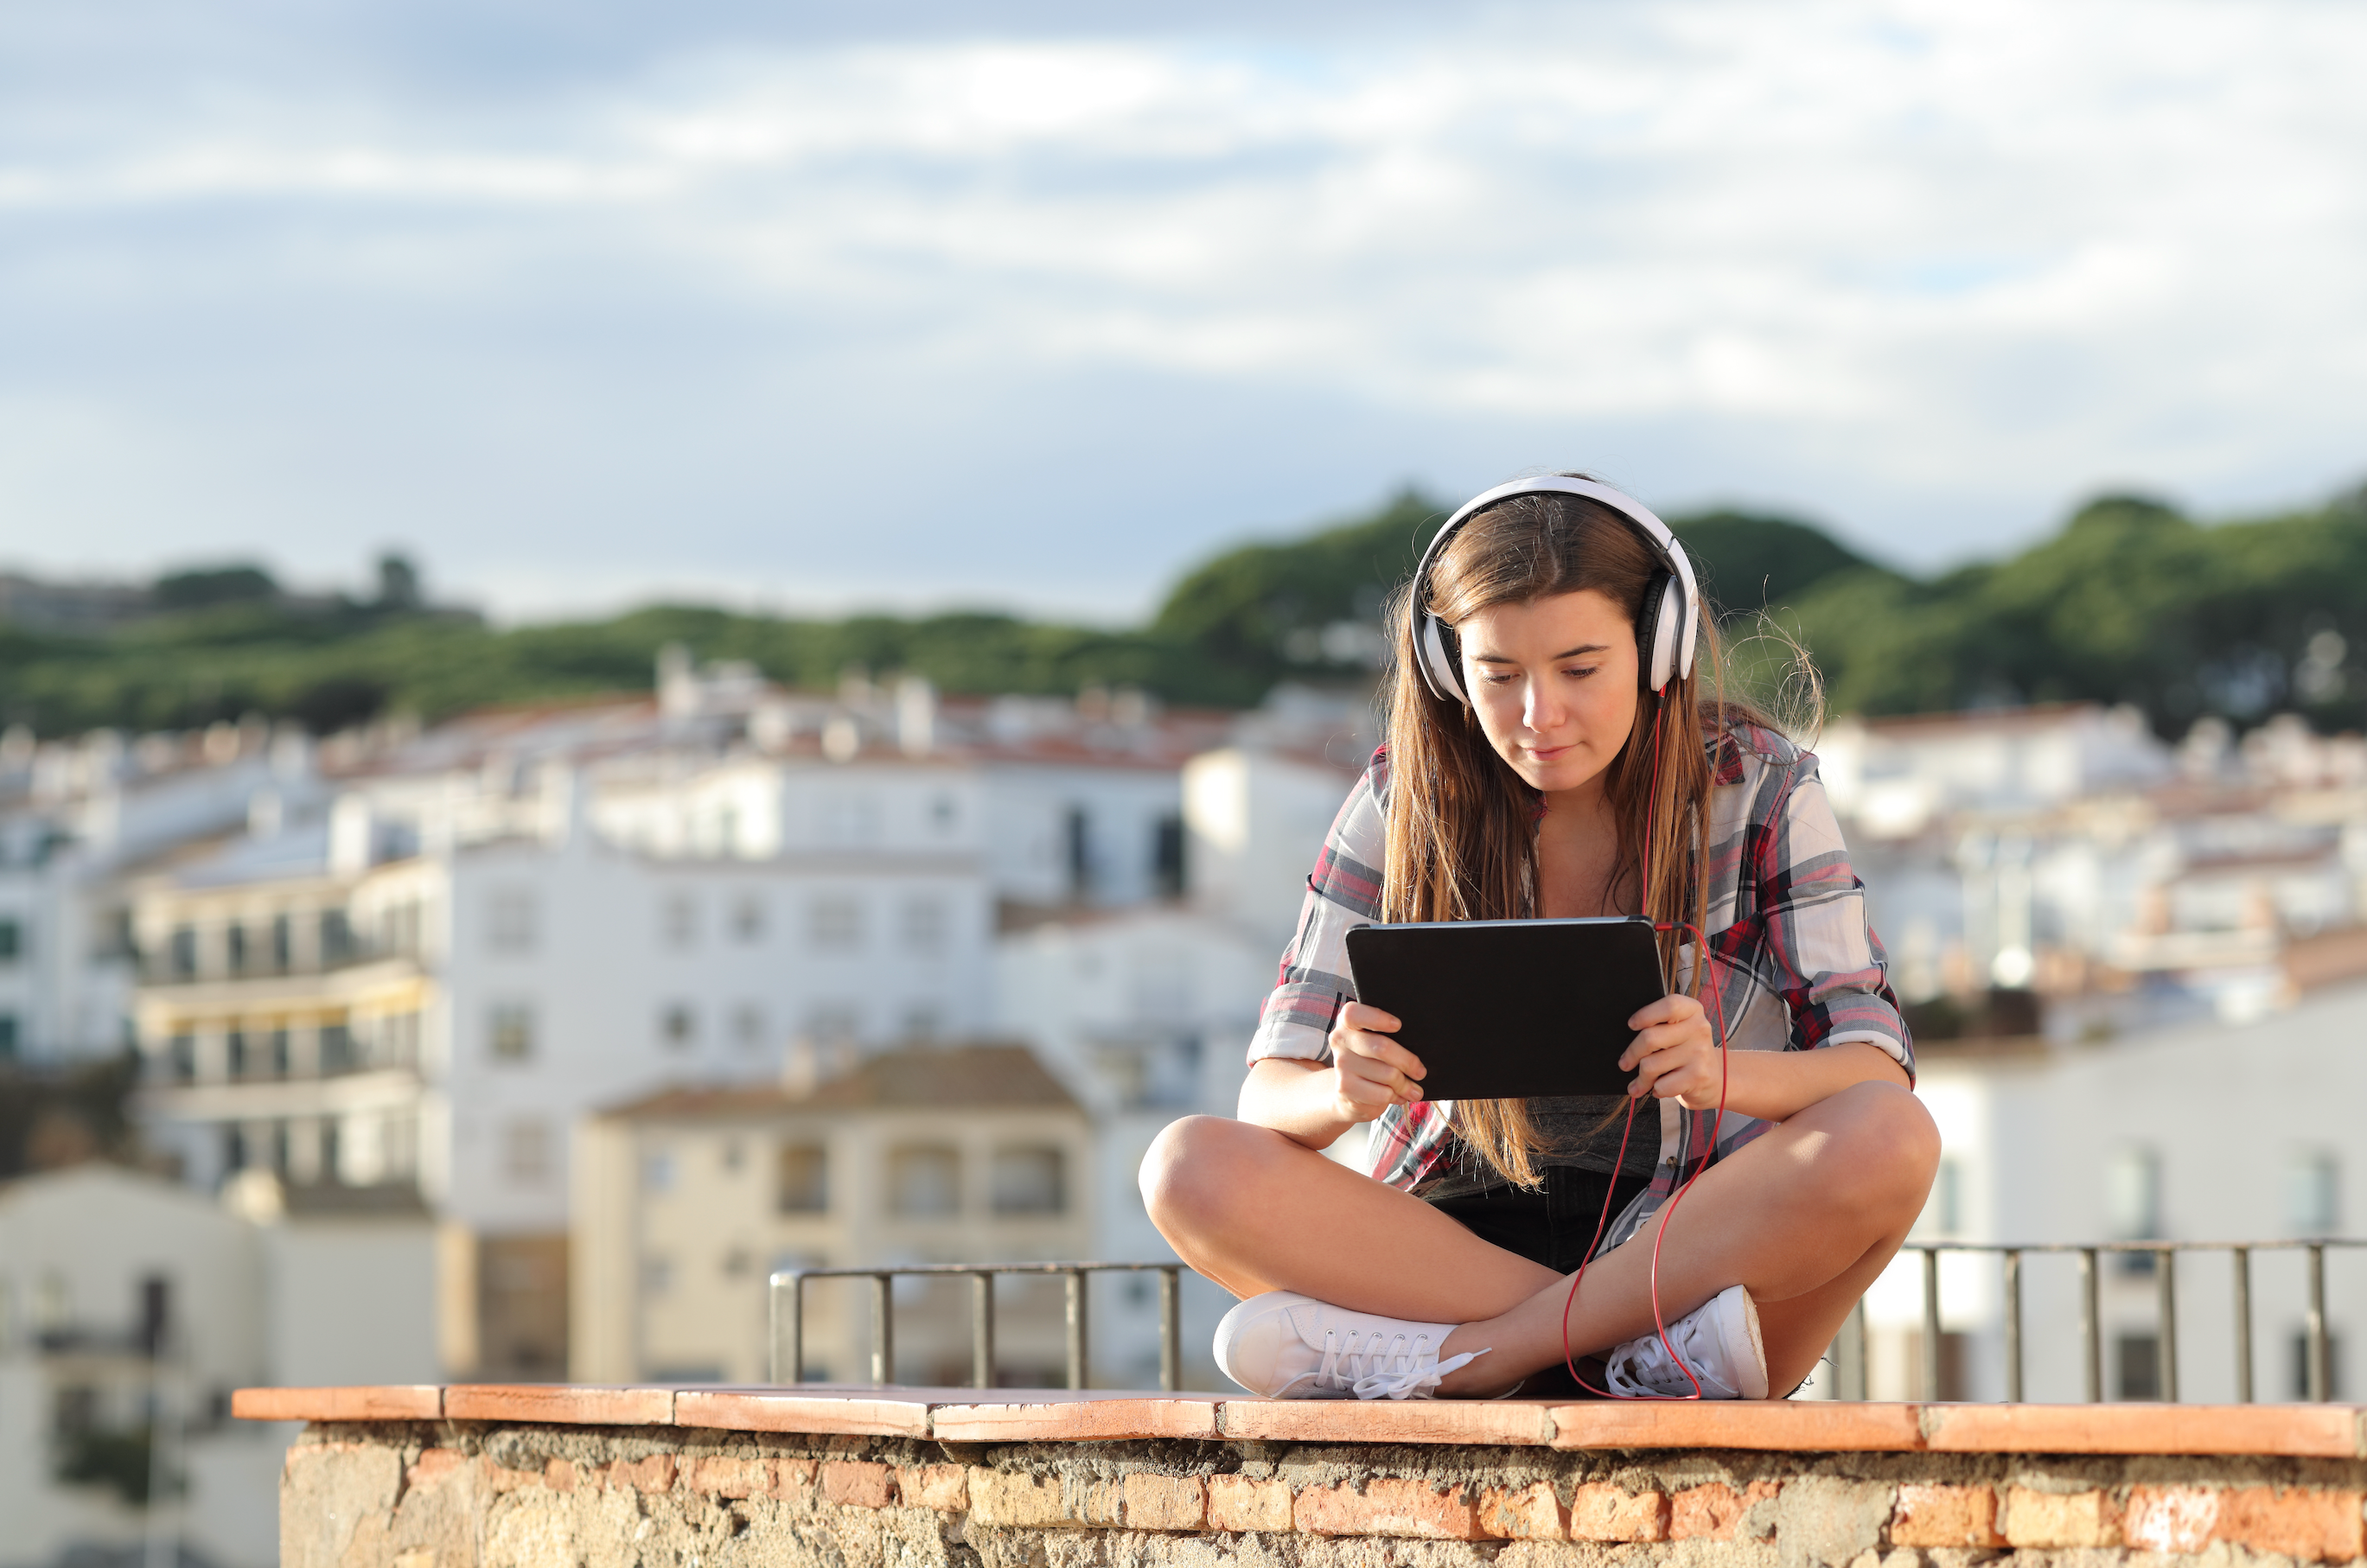 a woman with headphones on watches her tablet while sitting on a brick wall